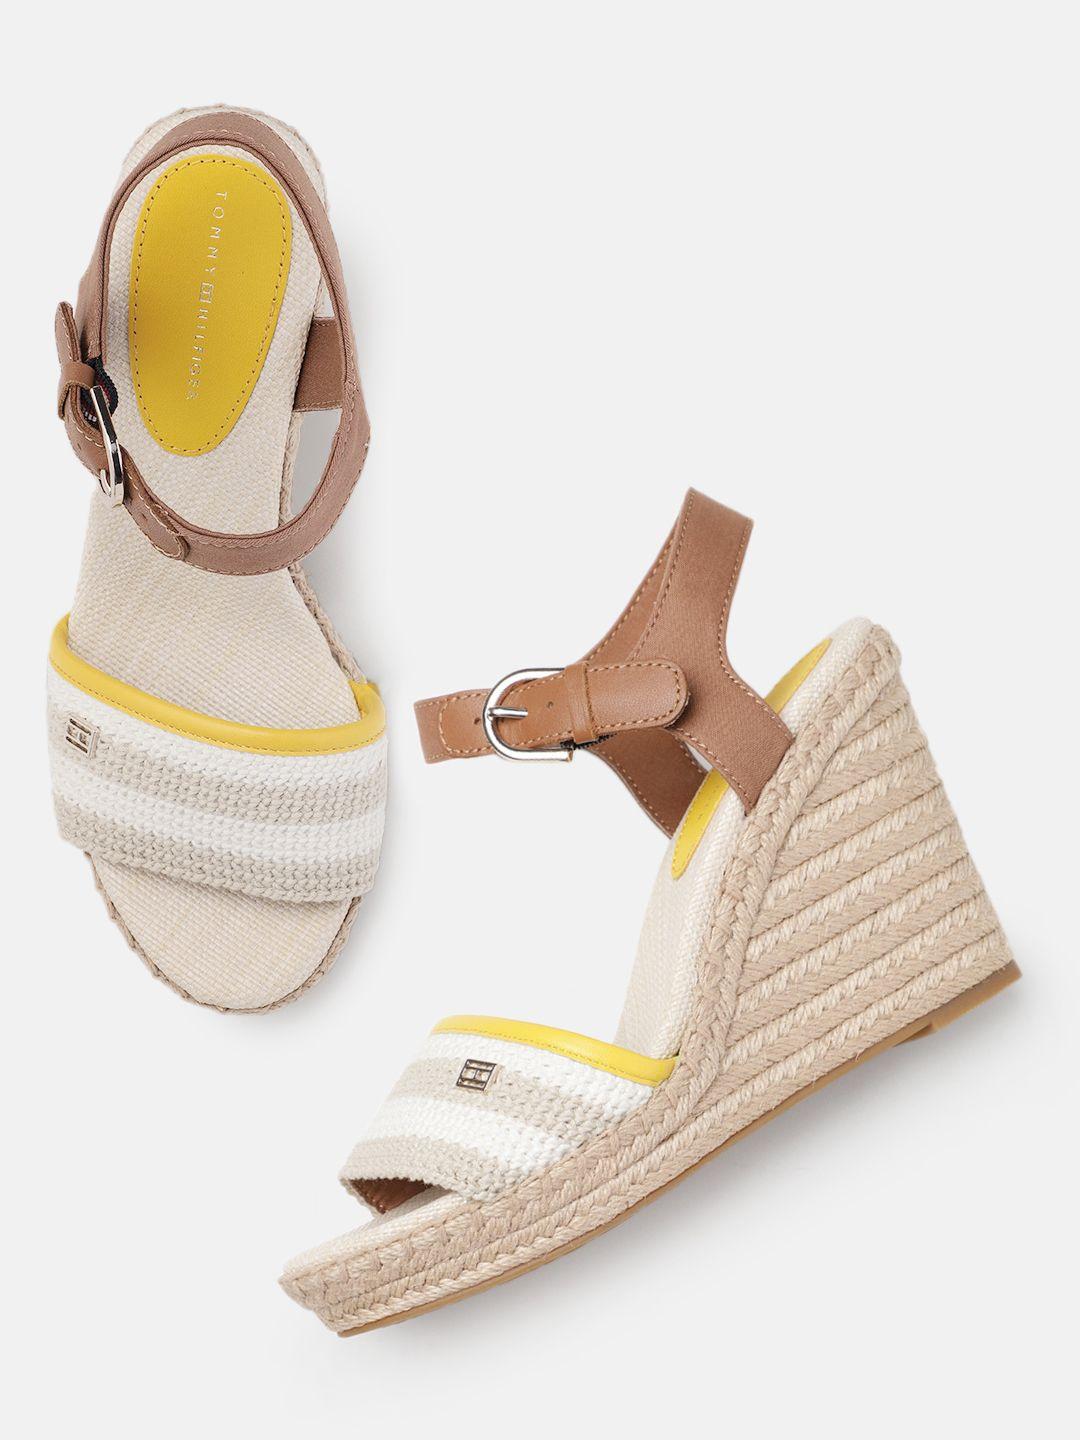 tommy-hilfiger-women-crochet-striped-wedge-sandals-with-buckle-detail